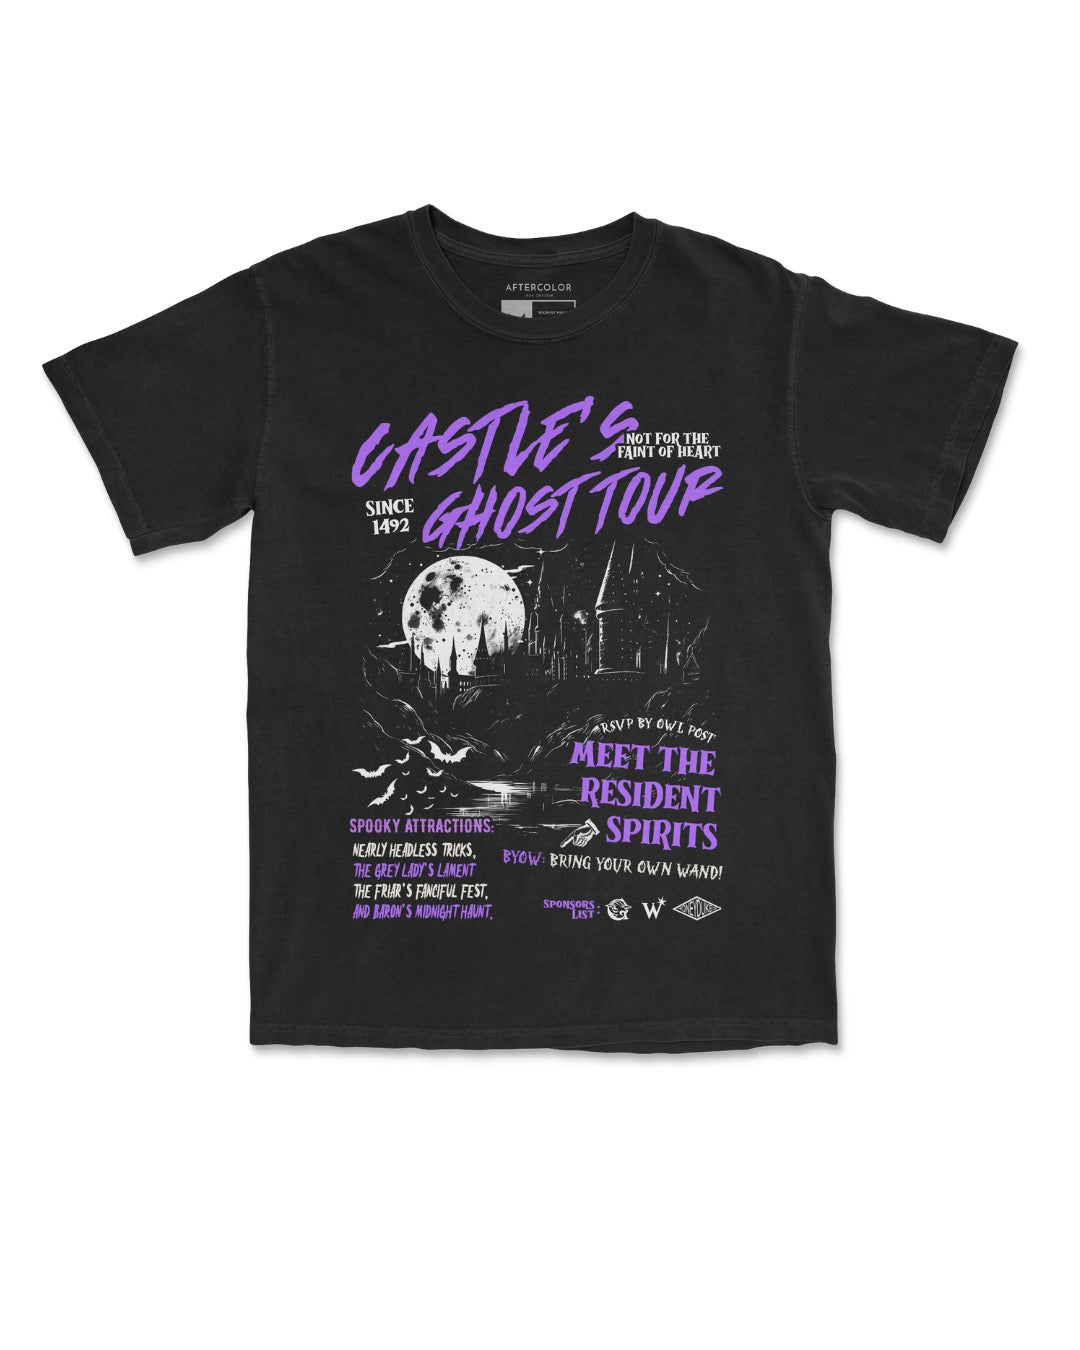 Castle's Ghost Tour Garment Dyed Tee